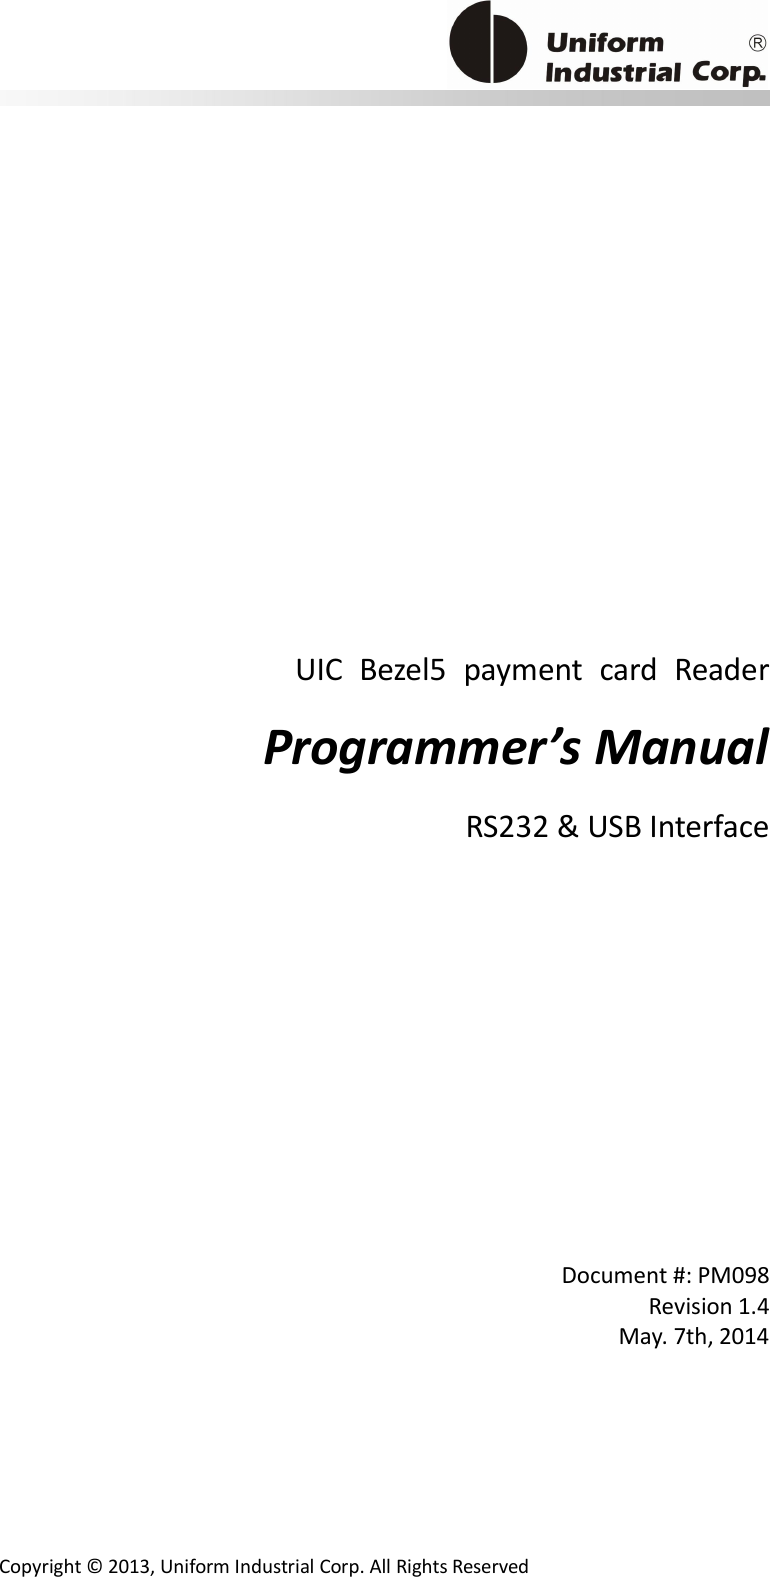                                           Copyright © 2013, Uniform Industrial Corp. All Rights Reserved      UIC  Bezel5  payment  card  Reader Programmer’s Manual RS232 &amp; USB Interface        Document #: PM098 Revision 1.4 May. 7th, 2014